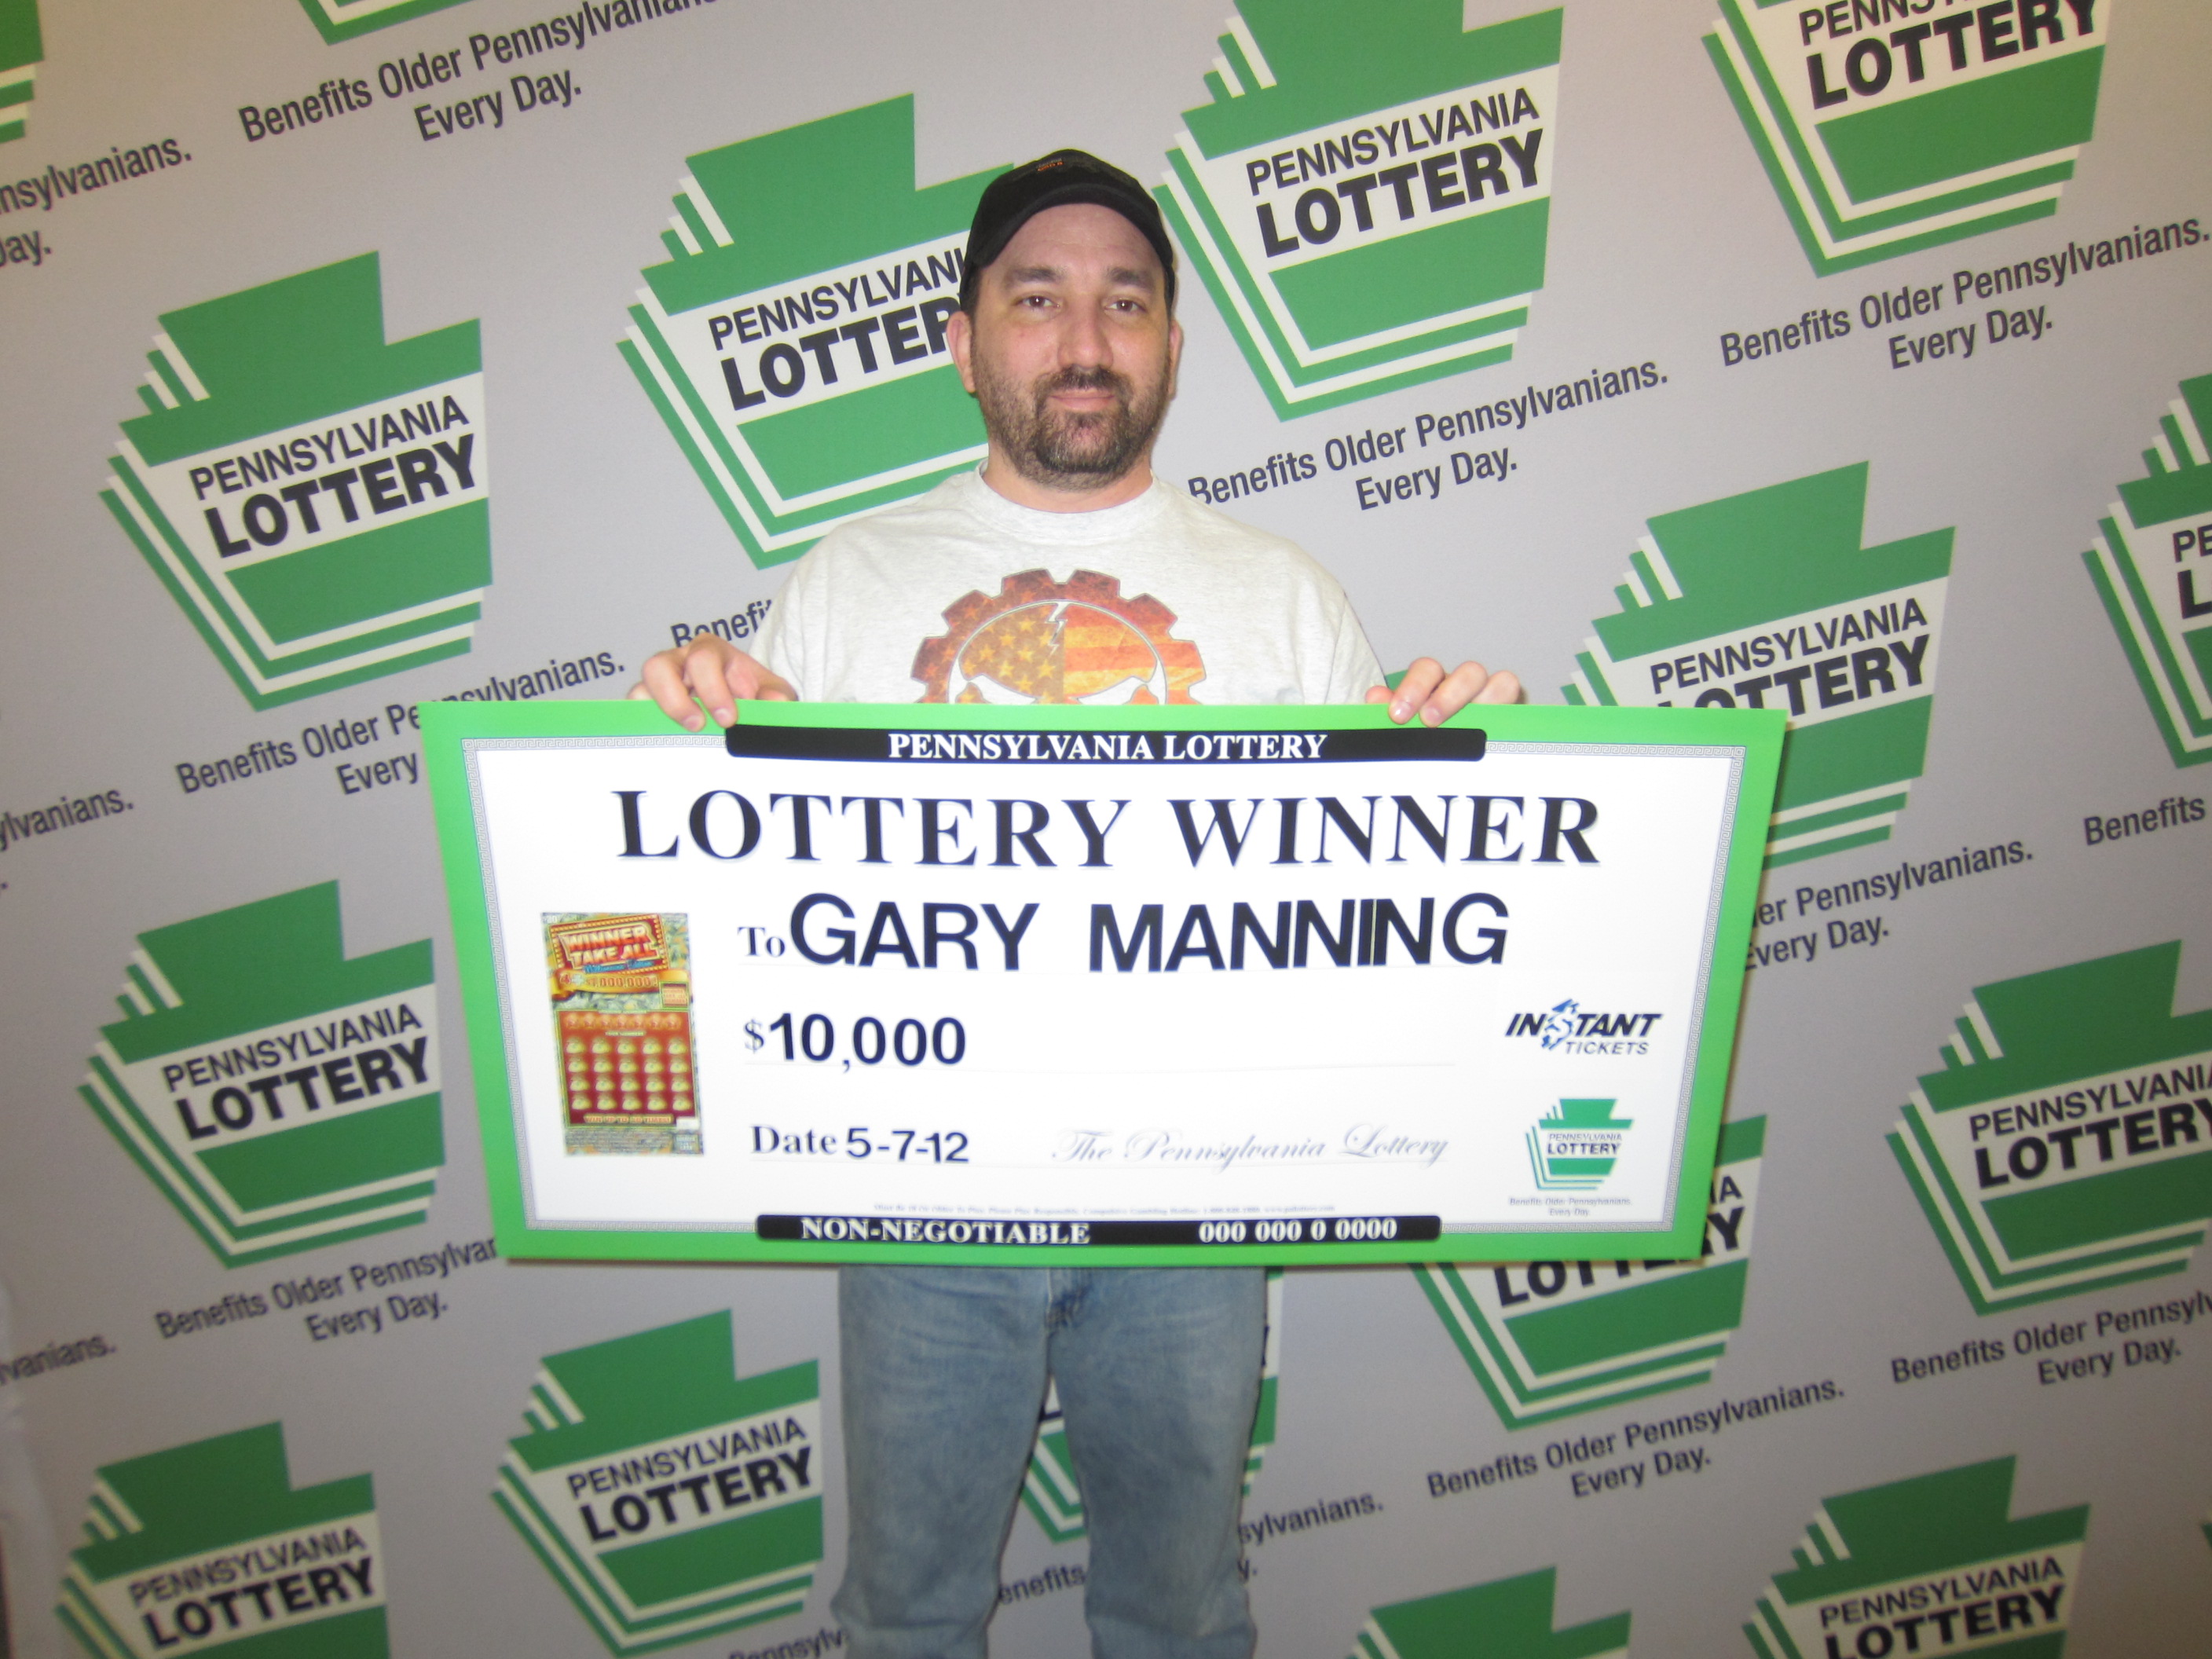 Pennsylvania Lottery - PA Lottery Winners Stories and Videos2816 x 2112